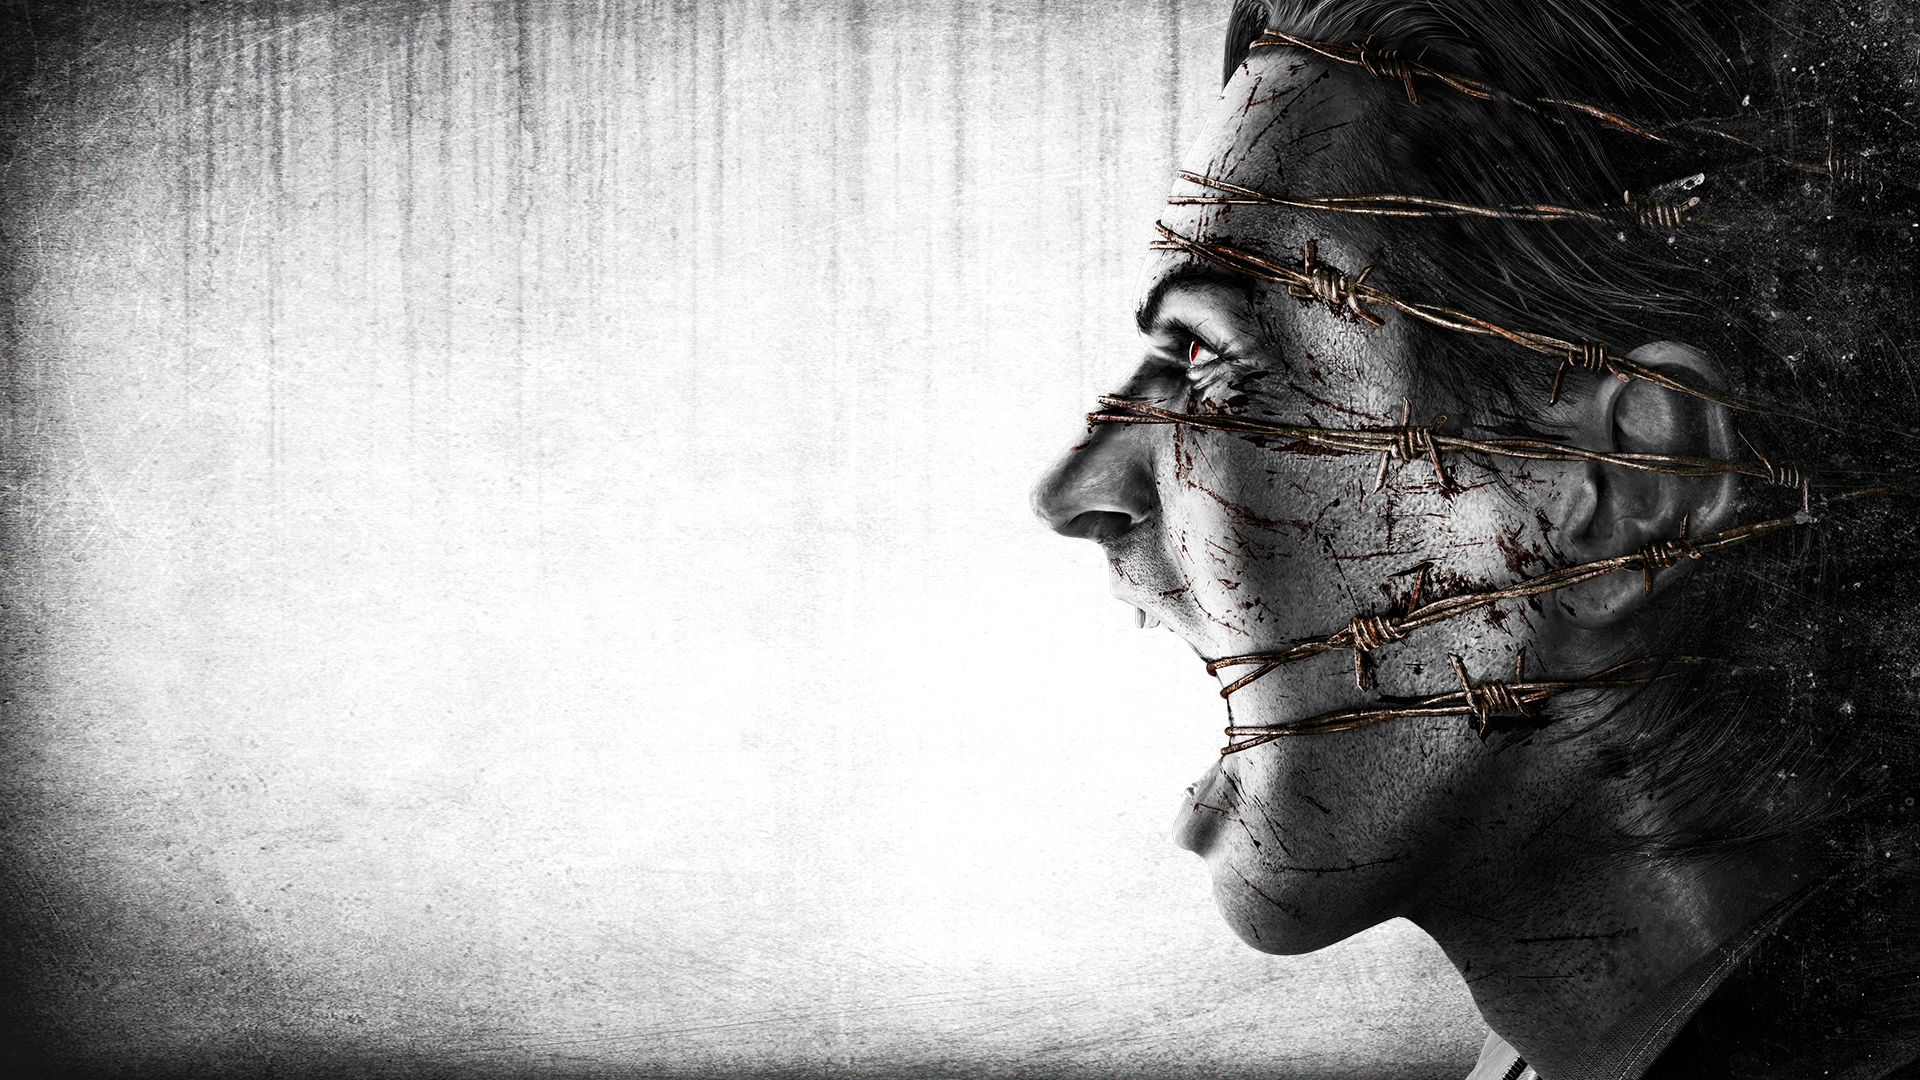 Wallpaper 7 Wallpaper From The Evil Within Gamepressurecom